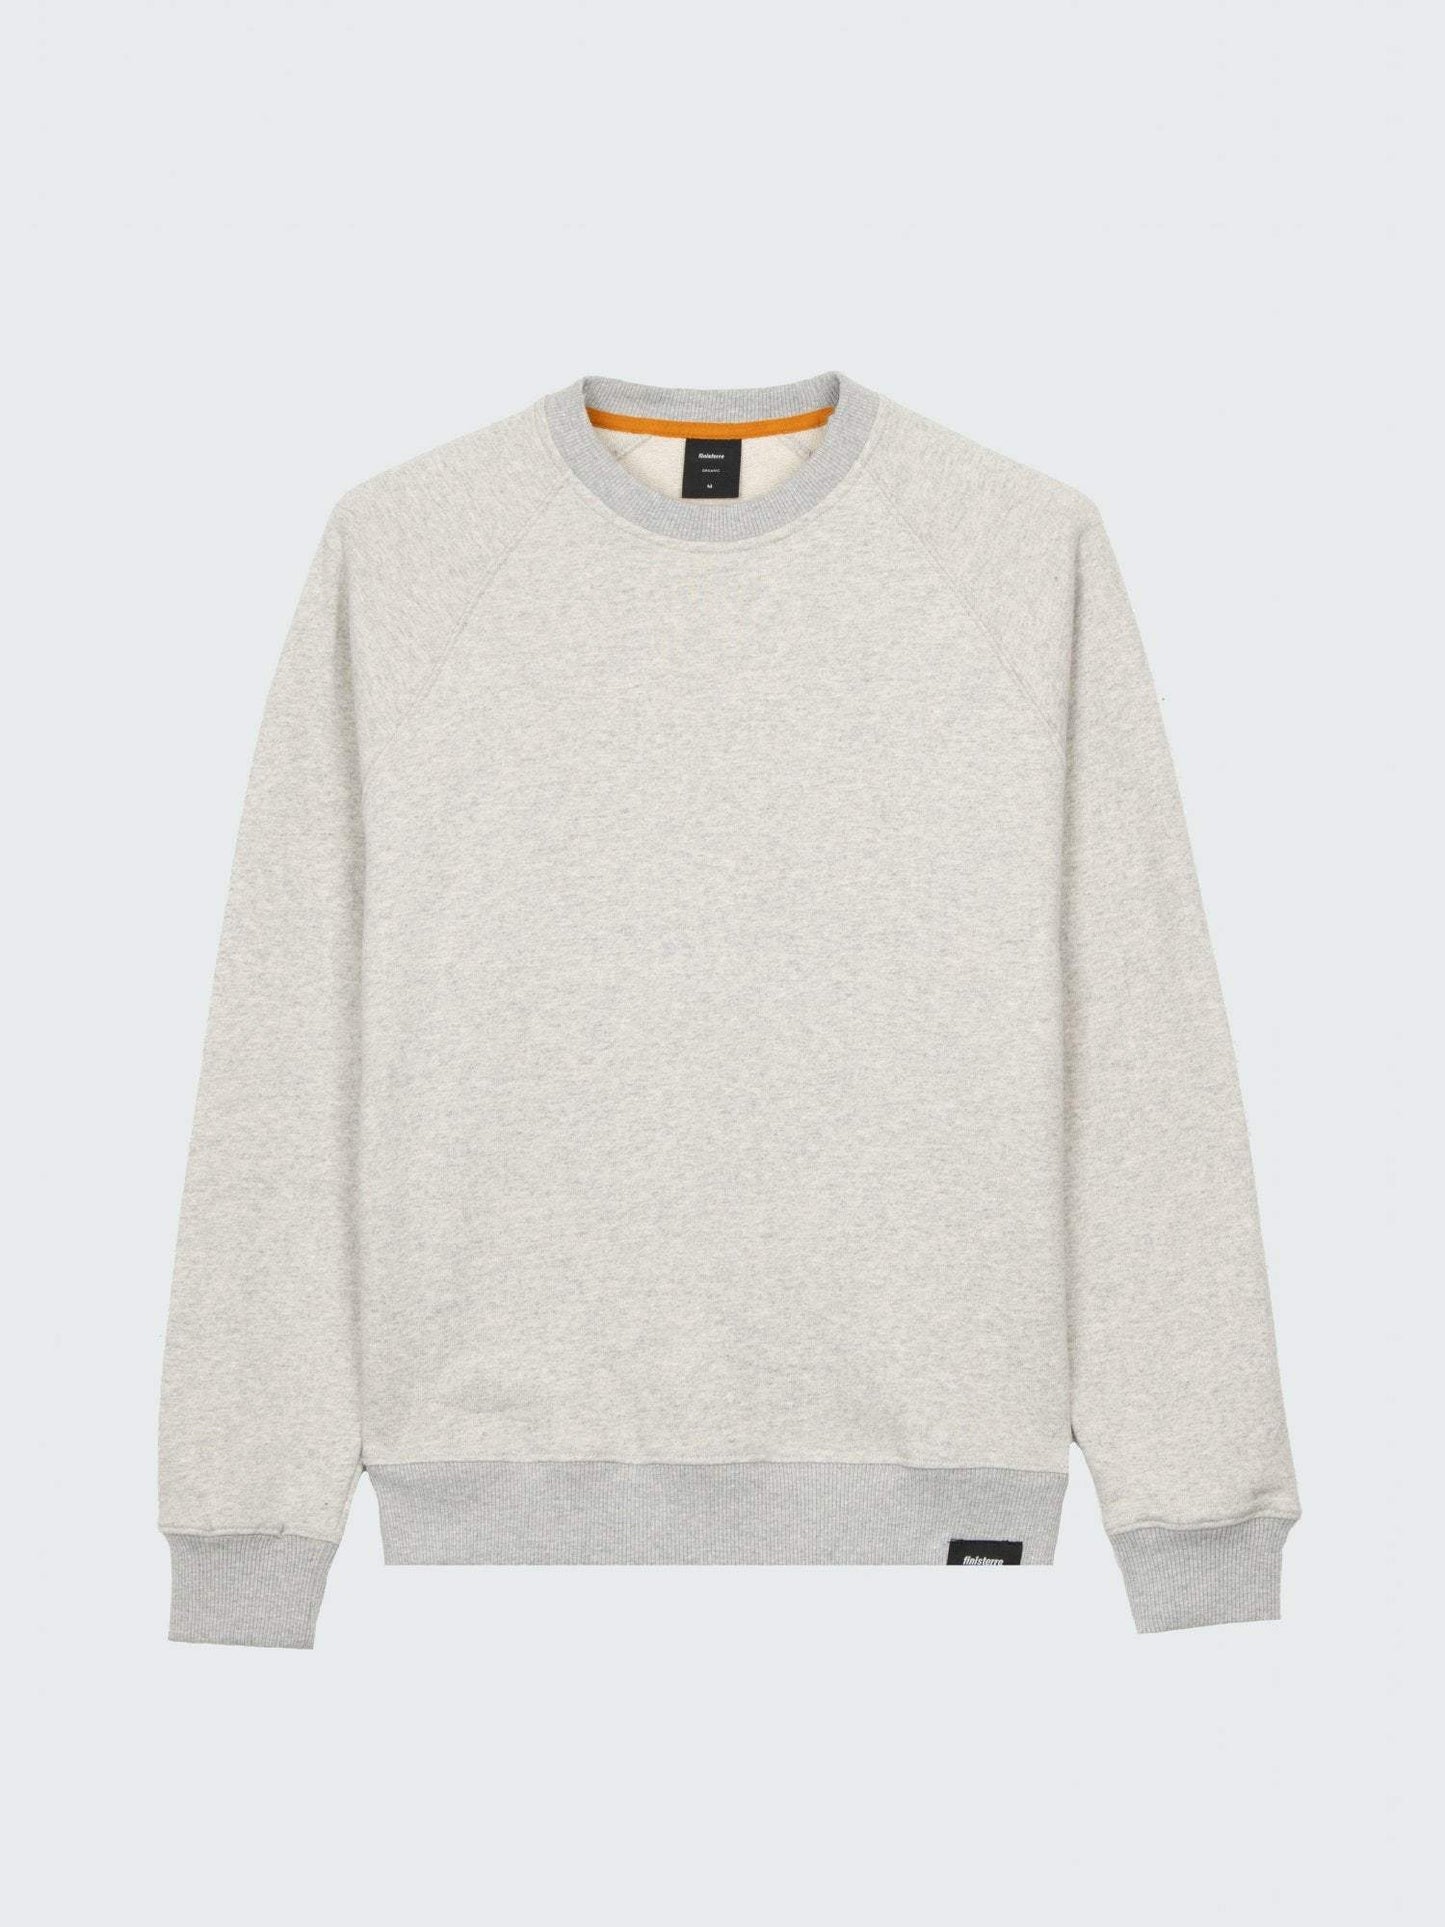 Coho Sweatshirt by Finisterre - The Luxury Promotional Gifts Company Limited